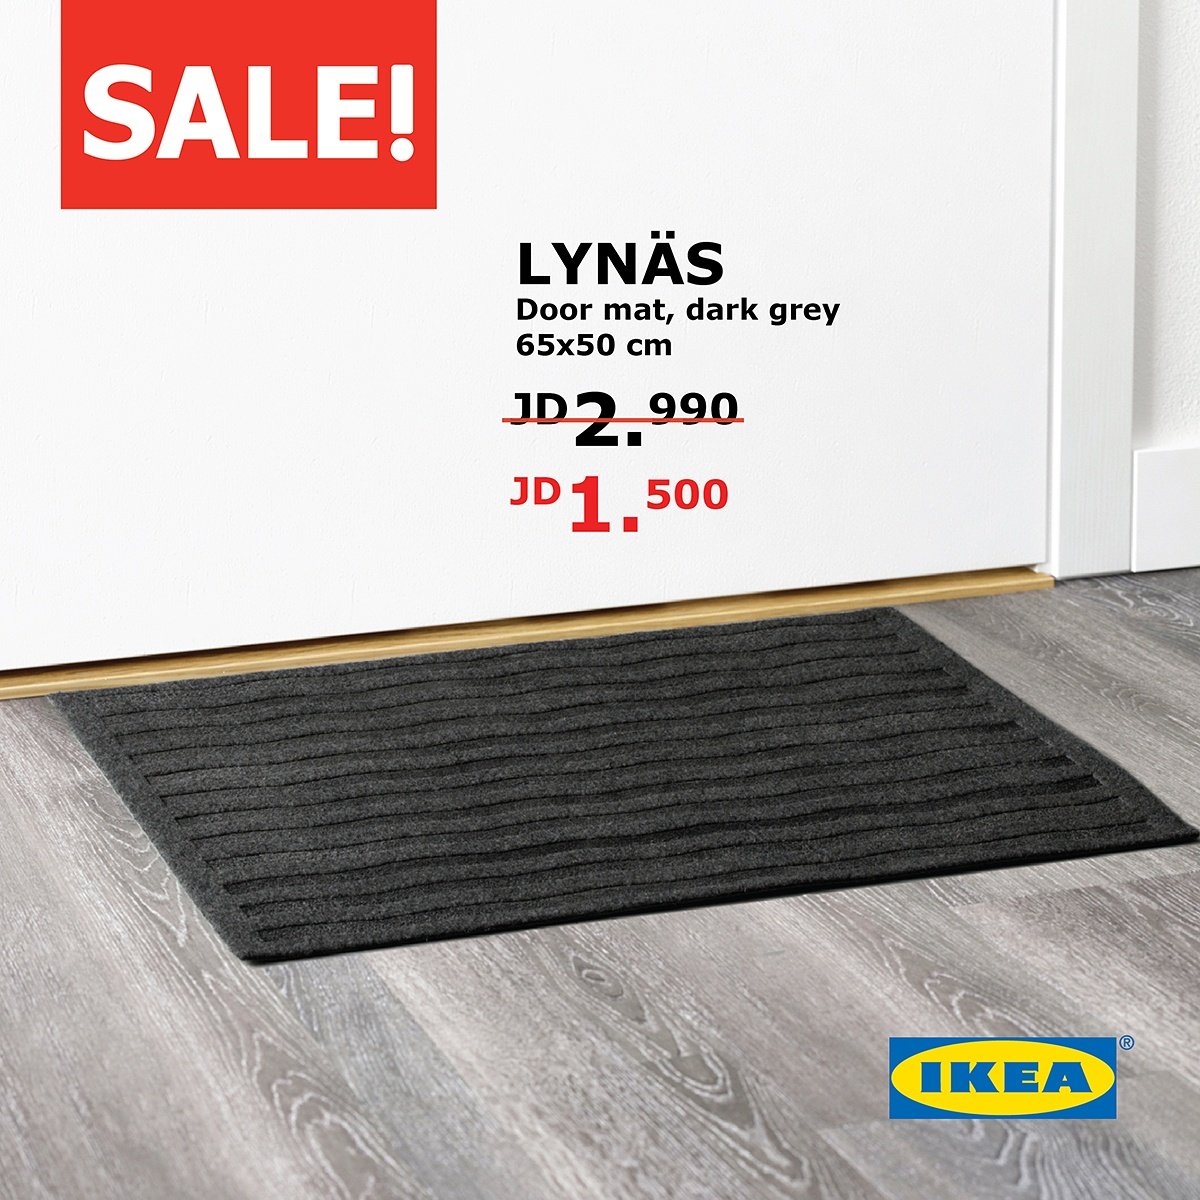 IKEA Jordan on X: This door mat has an anti-slip underlay that keeps it  firmly in place, reducing the risk of slipping. Get it now for JD 1.500  only!  / X